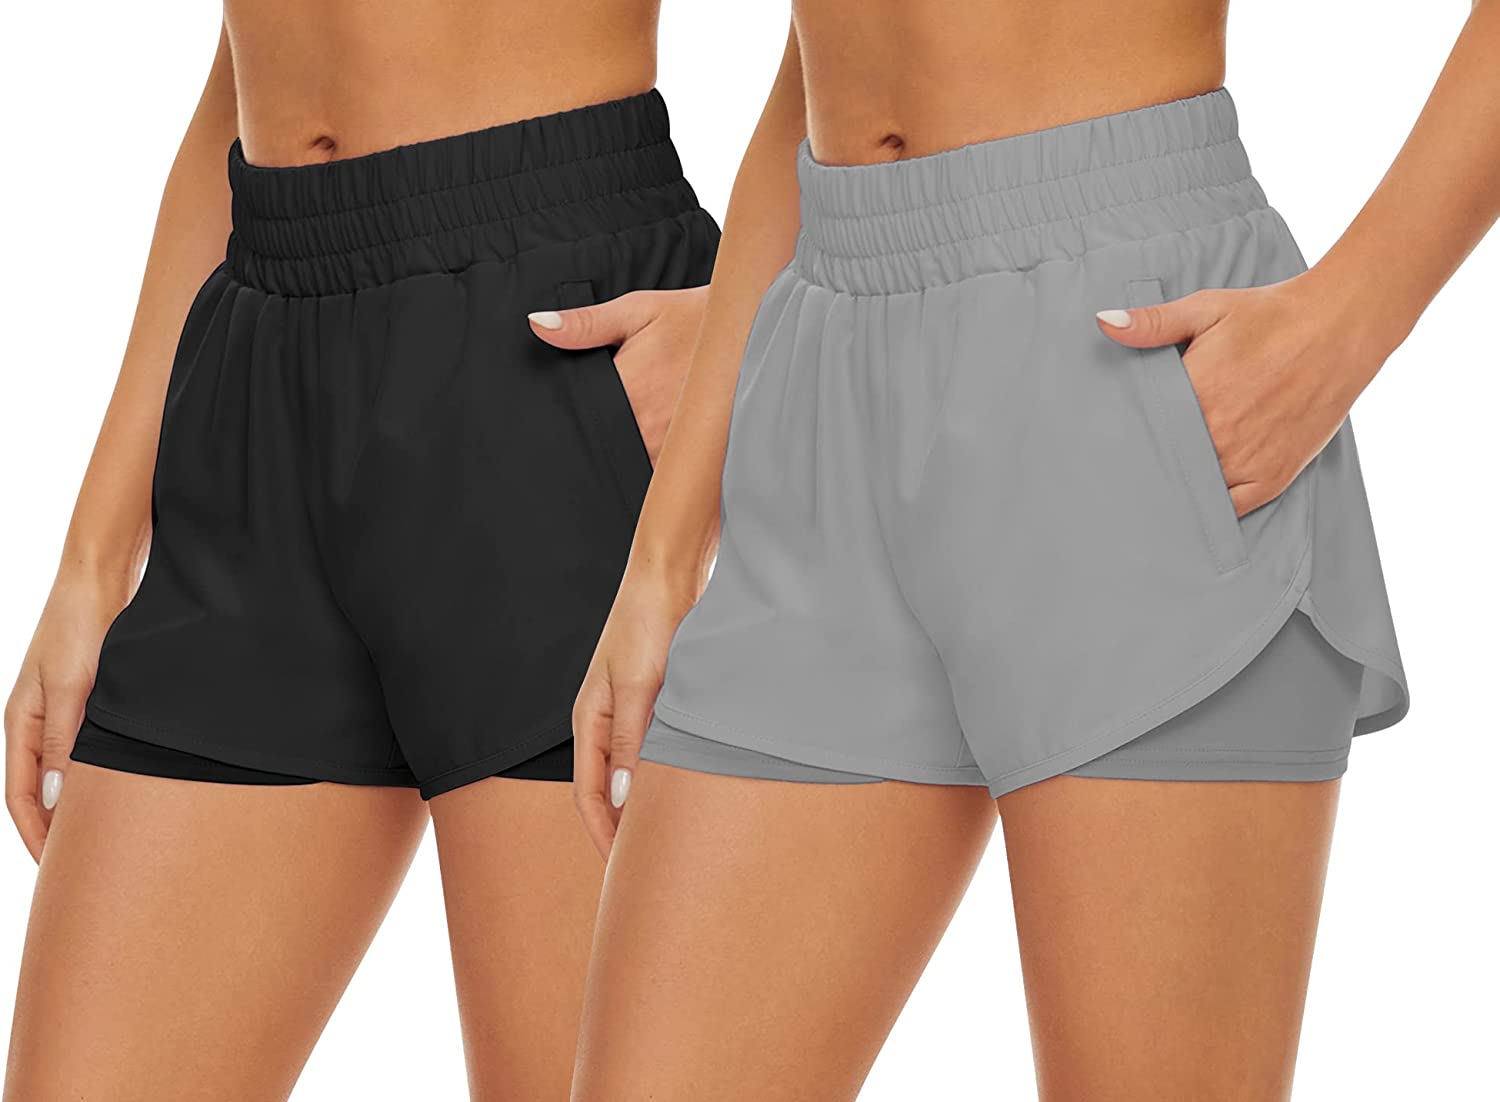 2 in 1 Shorts Women's Athletic Running Shorts for Women Quick-Dry